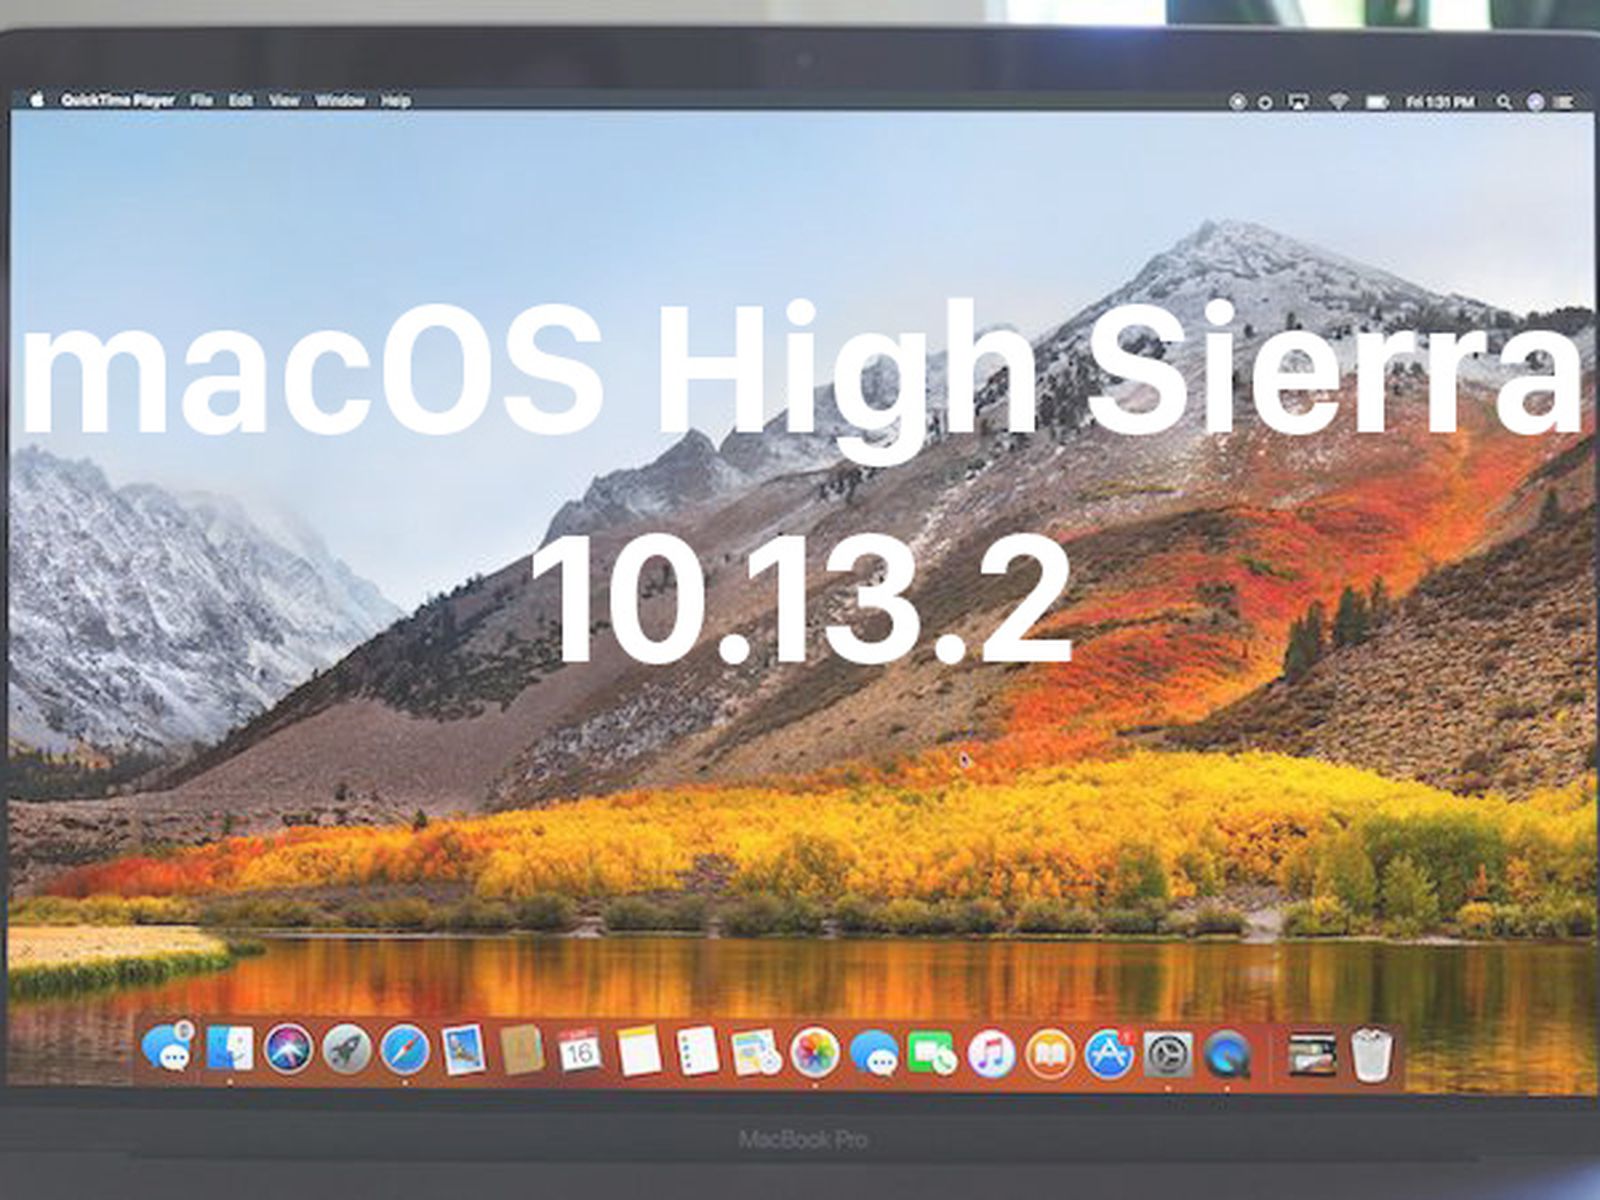 owners manual for mac os high sierra version 10.13.2